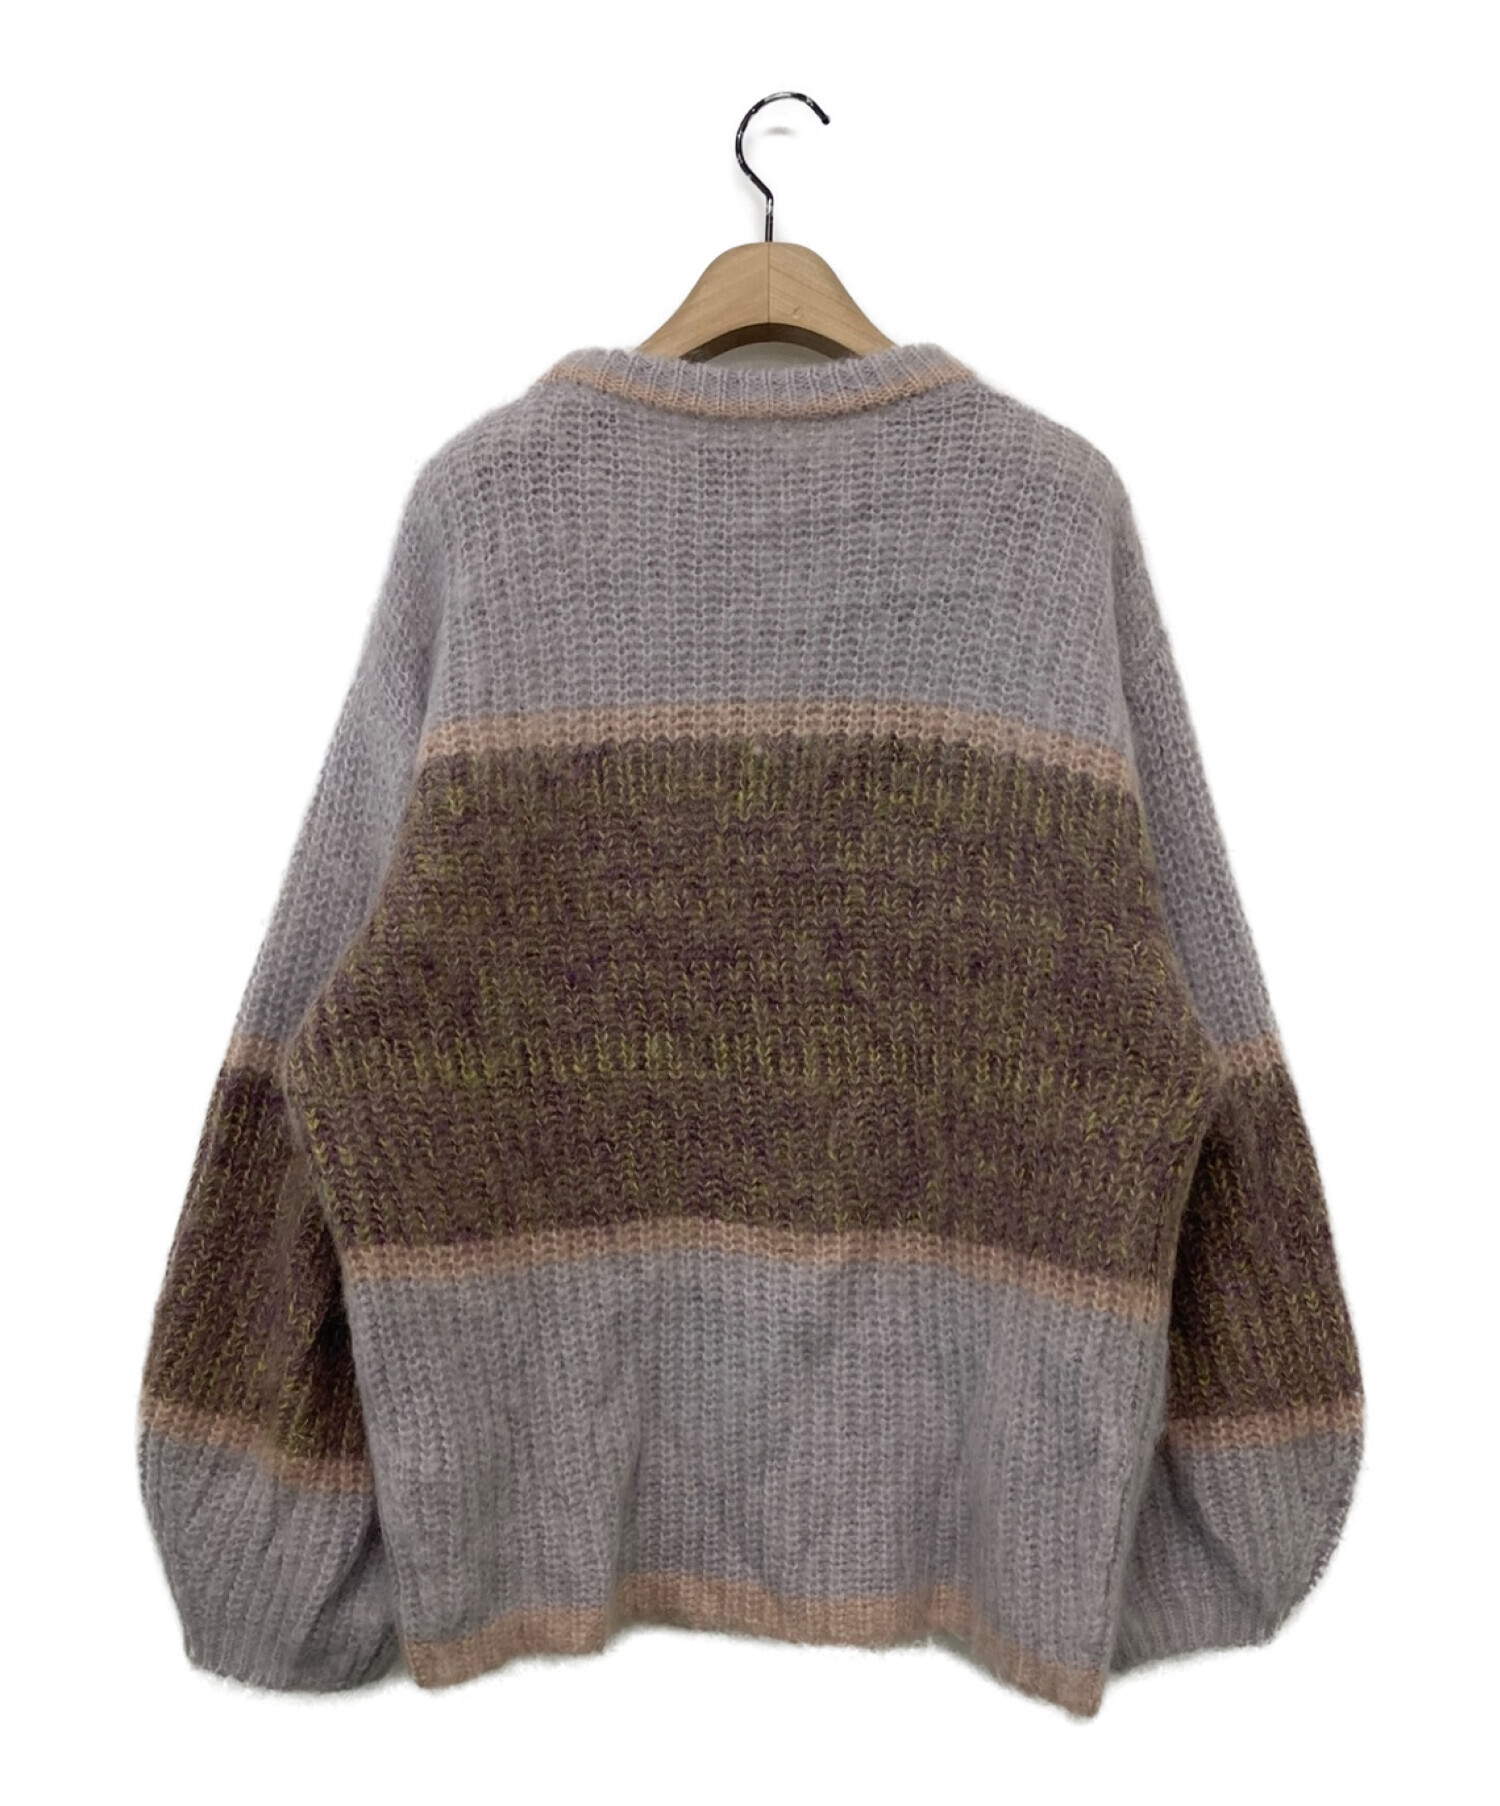 Ameri VINTAGE (アメリヴィンテージ) UND MOHAIR BICOLOR LOOSE KNIT ラベンダー サイズ:-